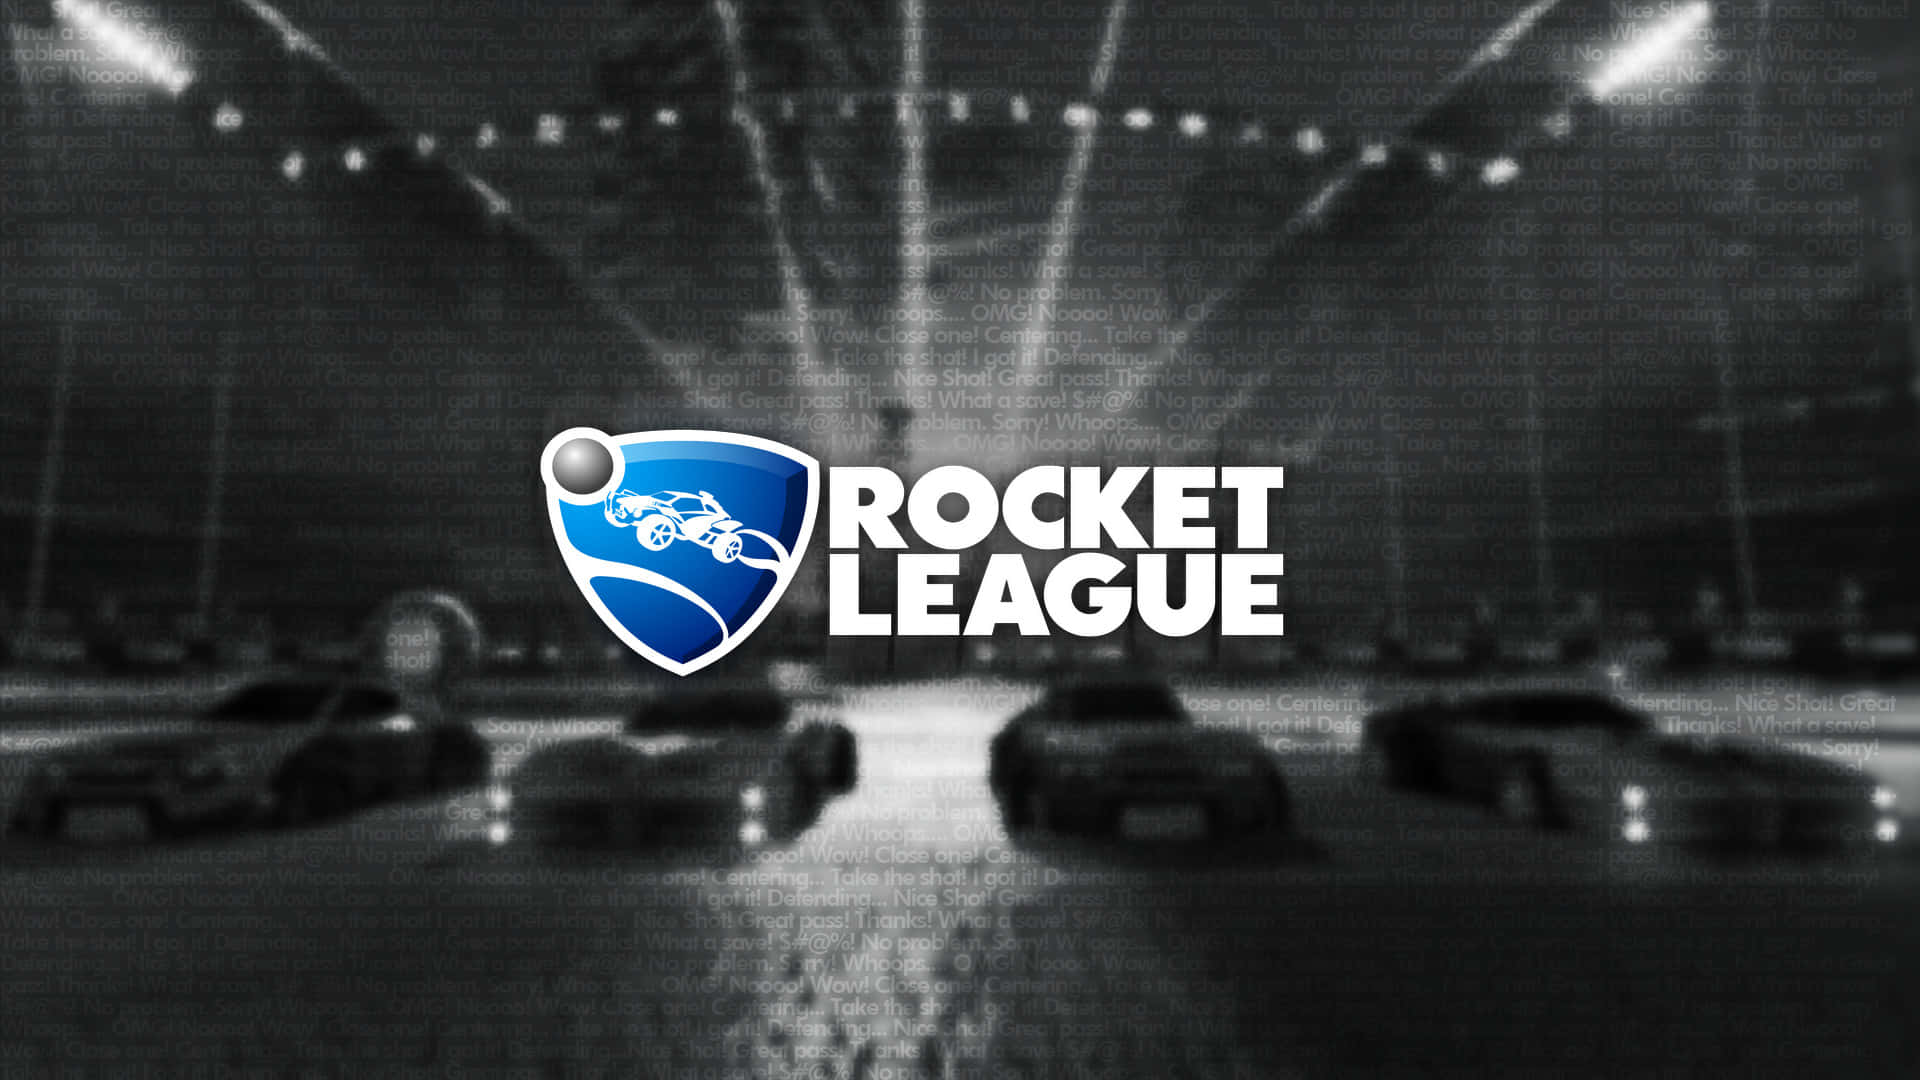 Image  Get Up Close and Personal with Rocket League!